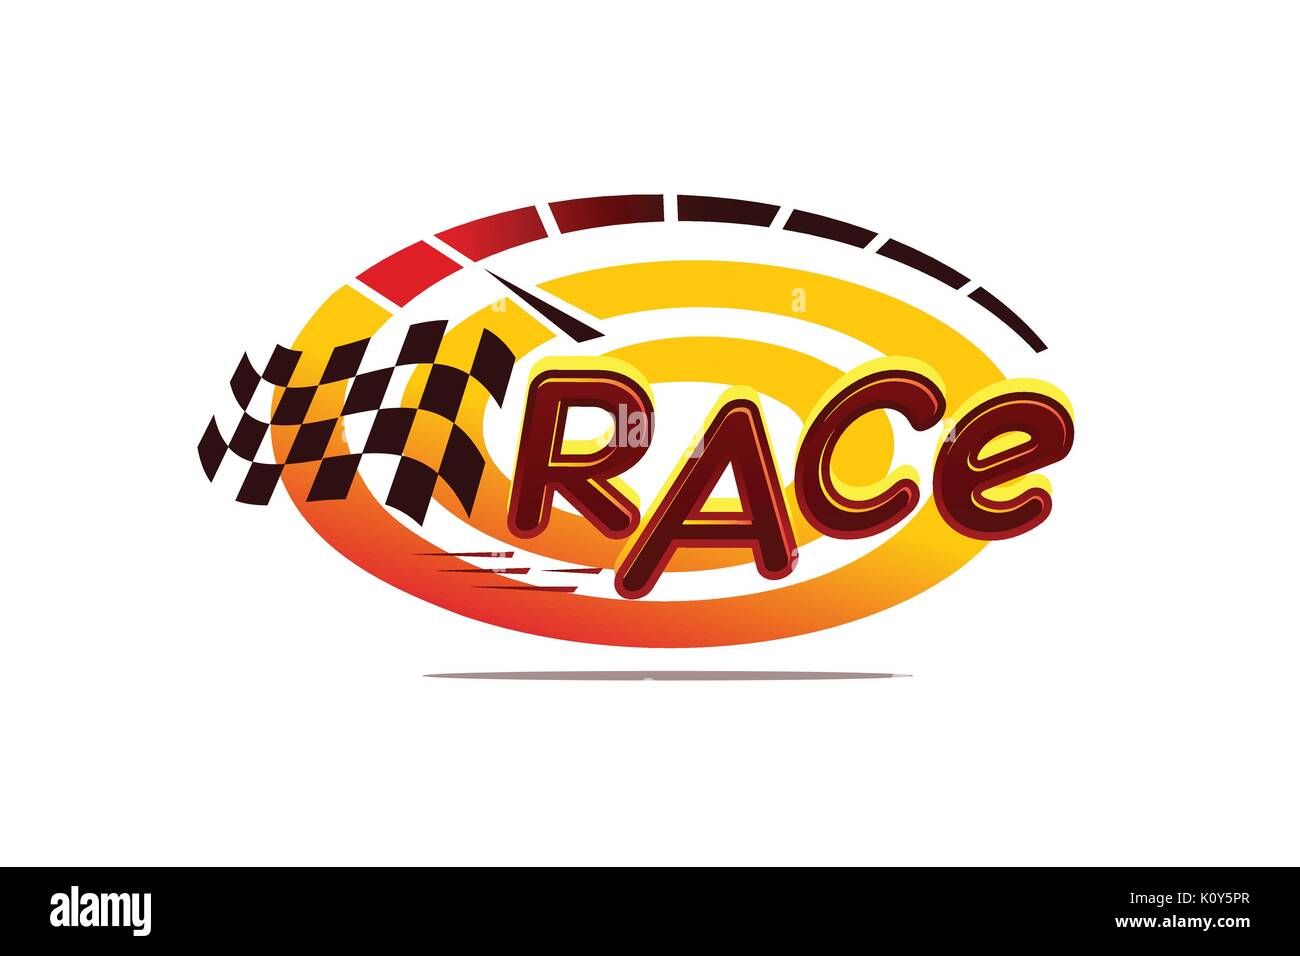 rece logo, swirl with speed meter and checkered flag illustration, illustration design, isolated on white background. Stock Vector